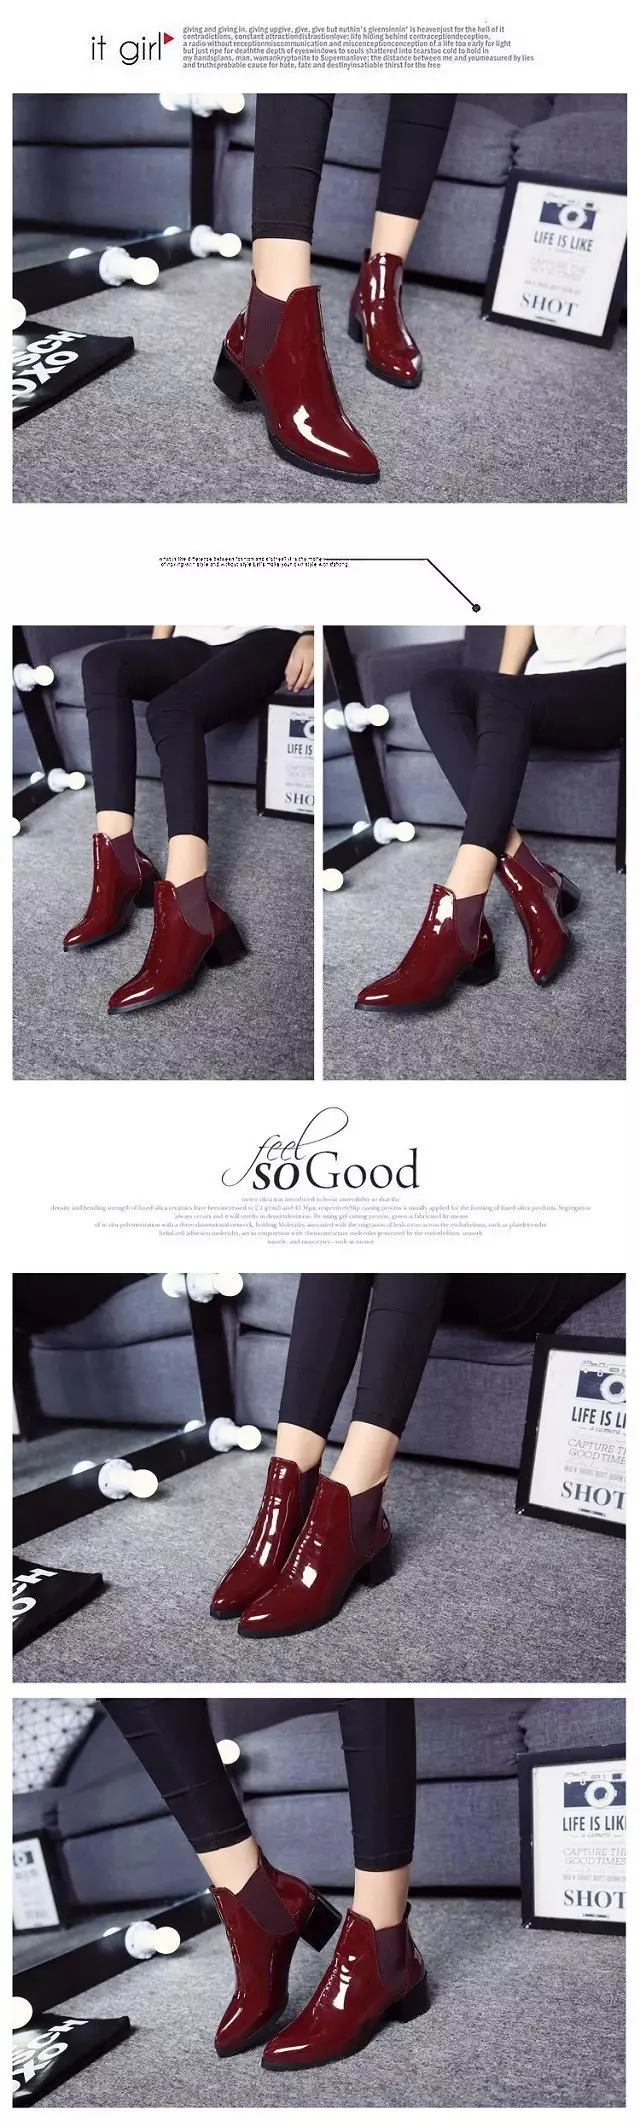 New Arrival Fashion Shoes Women Boots Elasticated Patent Leather Ankle Boots Pointed Low Heel Boots Female Sexy Shoes